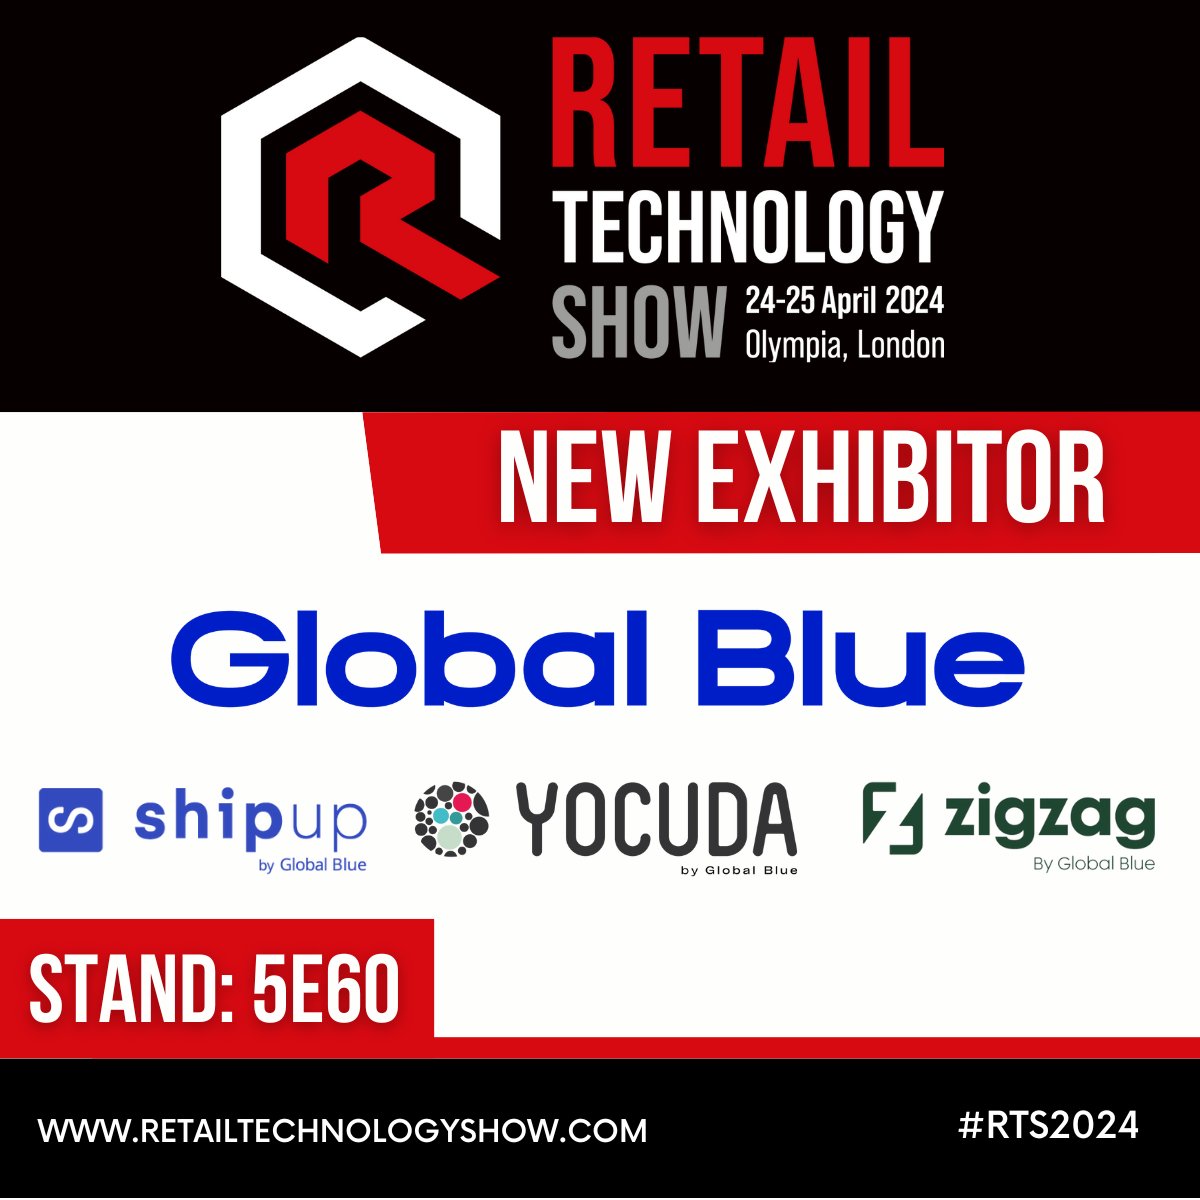 🌟 ANNOUNCING OUR LATEST EXHIBITORS: @GlobalBlue, Shipup, Yocuda & Zigzag 

Register for Retail Technology Show 2024 for free - hubs.la/Q02s_v_H0

#retailtech #retailtechnology #retailindustry #retailsolutions #retailoperations #Retailinnovation #RTS2024